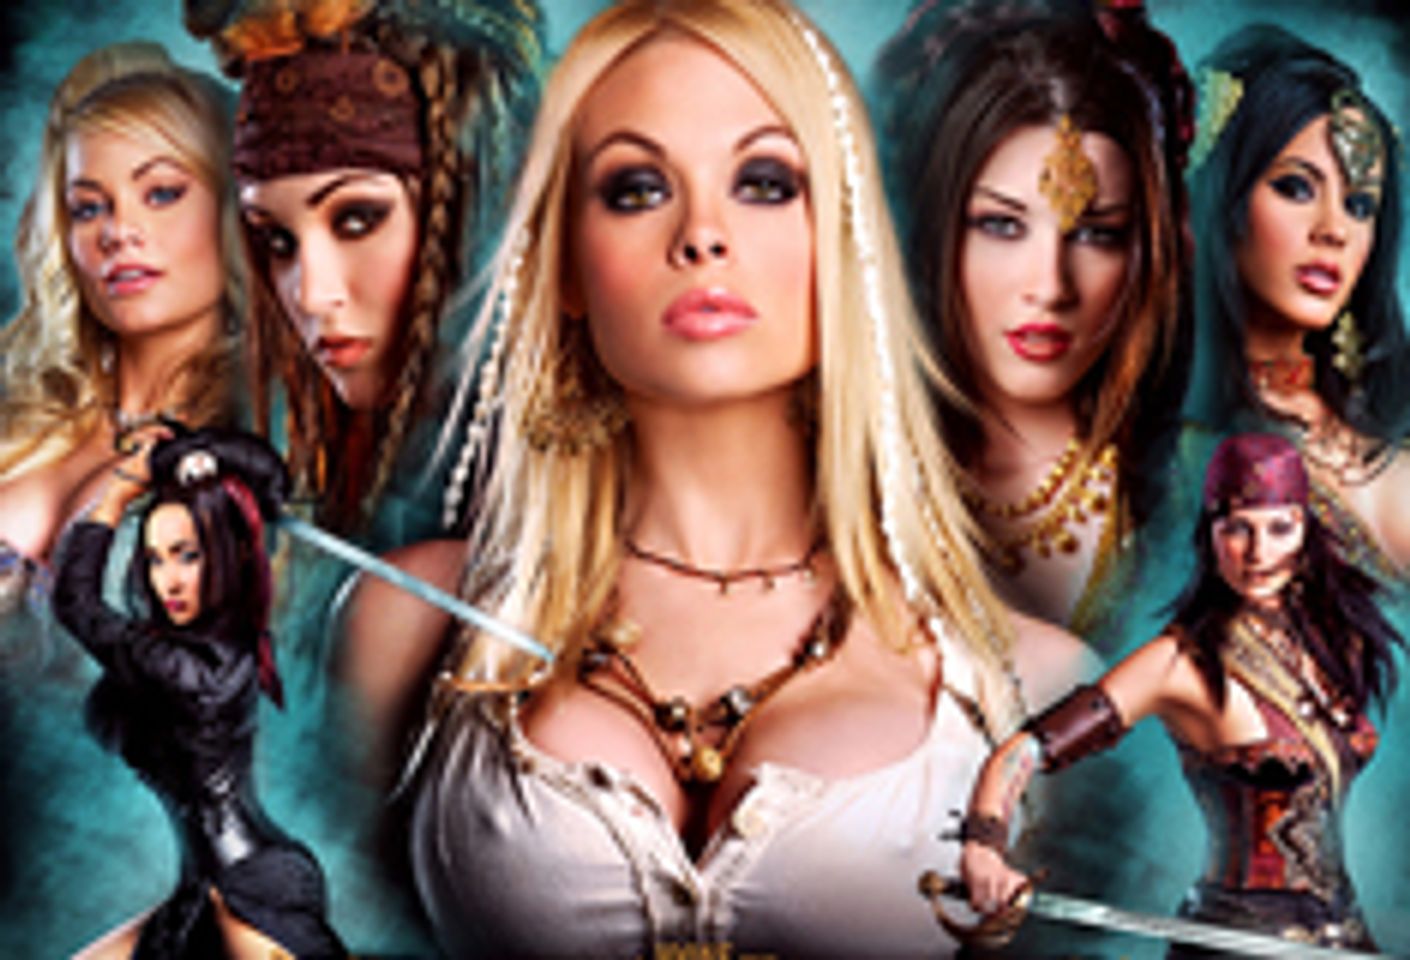 Digital Playground Launches 'Pirates II' Contest for Retailers